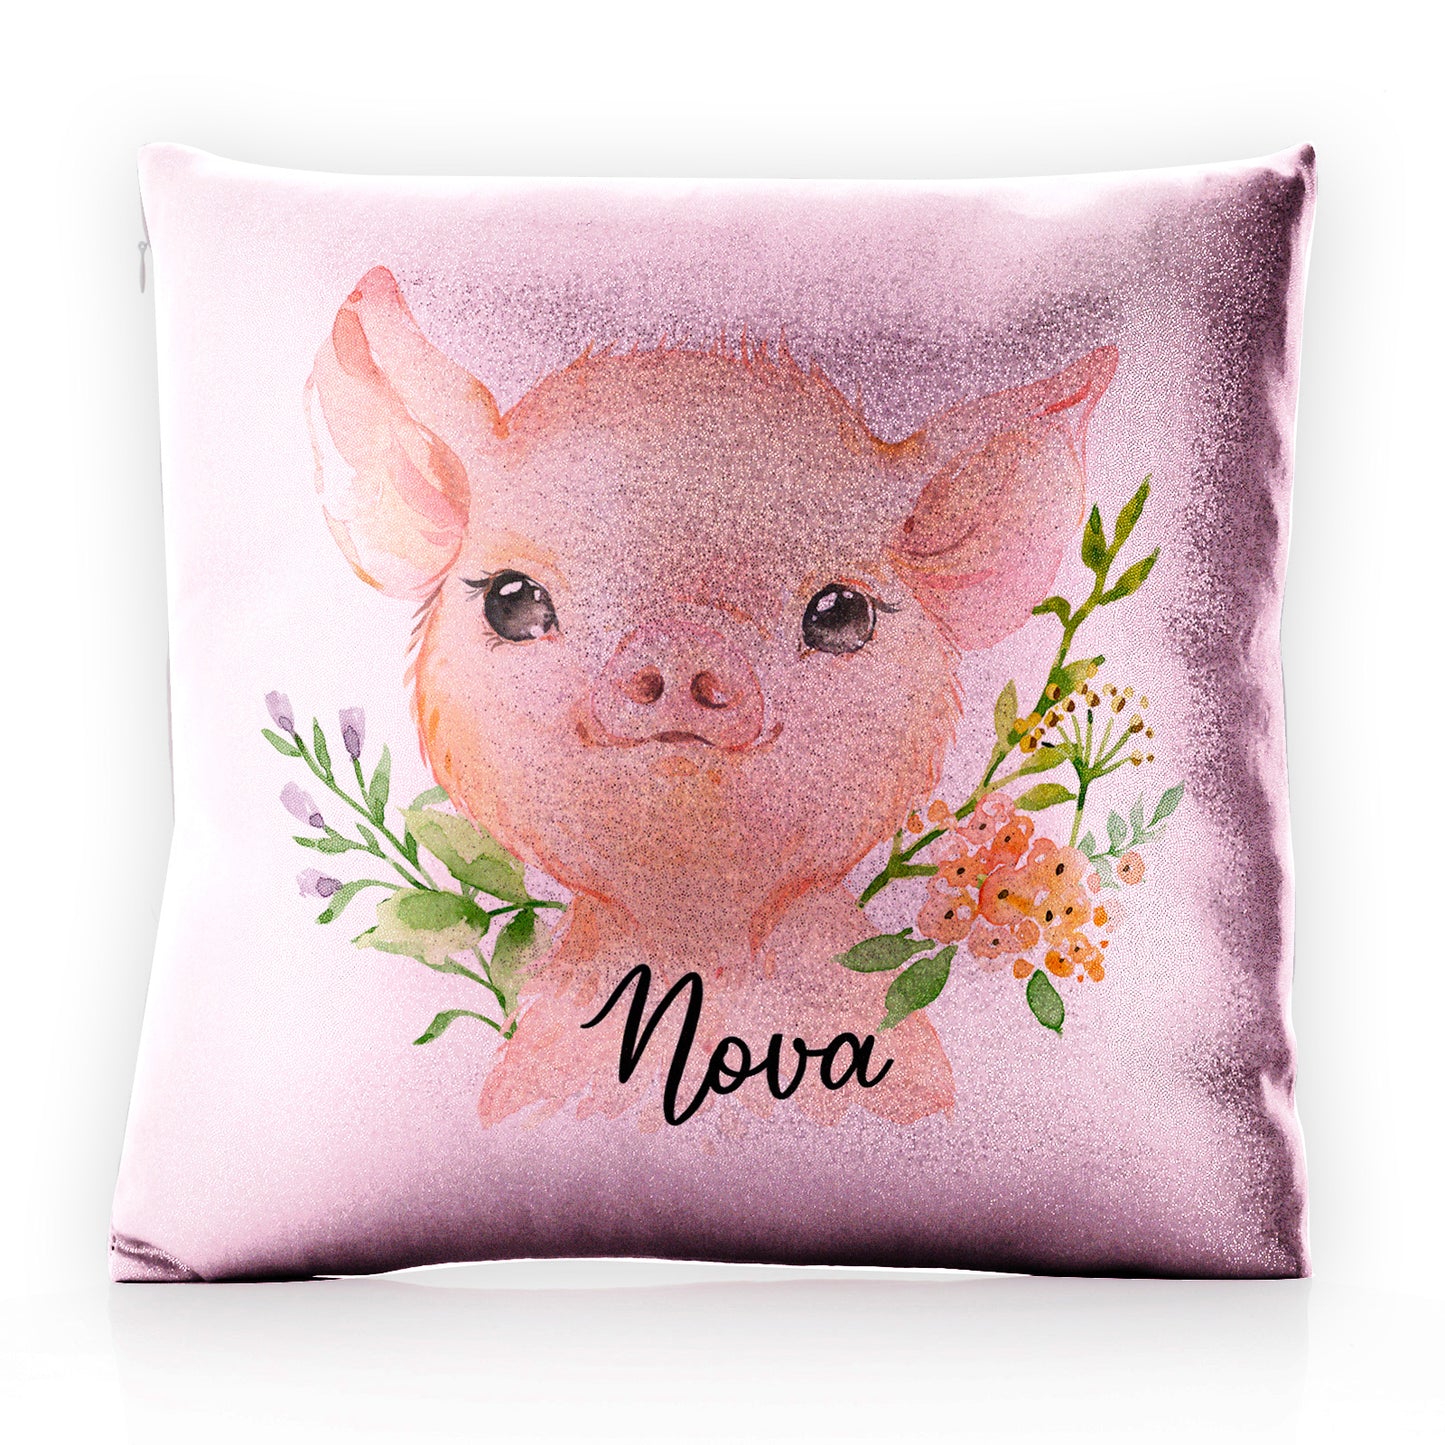 Personalised Glitter Cushion with Pink Pig Flowers and Cute Text